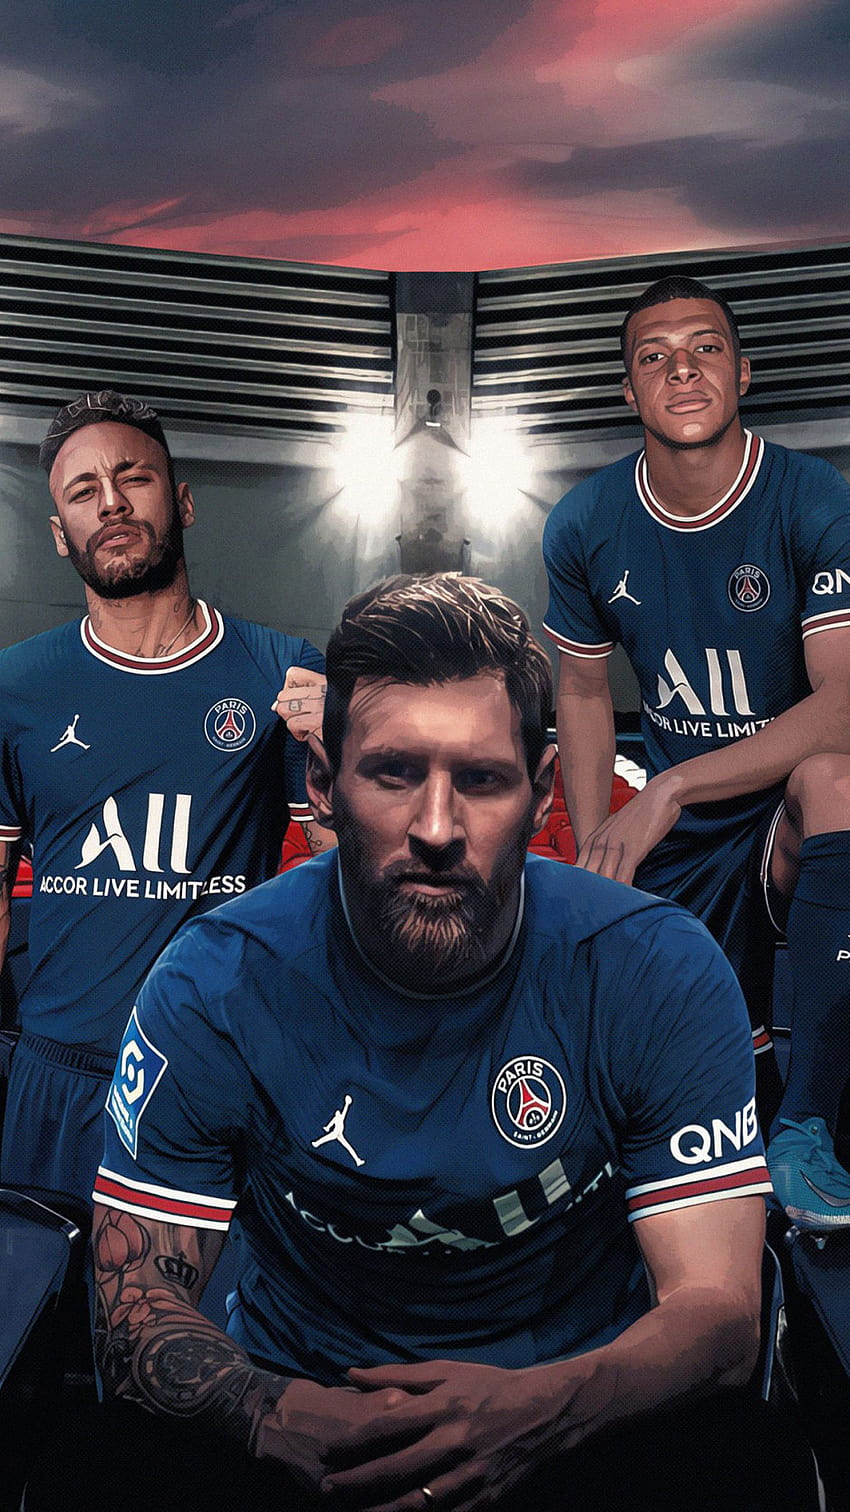 Messi Psg : Lionel Messi Barcelona 2020 For Android Apk, messi psg iphone HD phone wallpaper